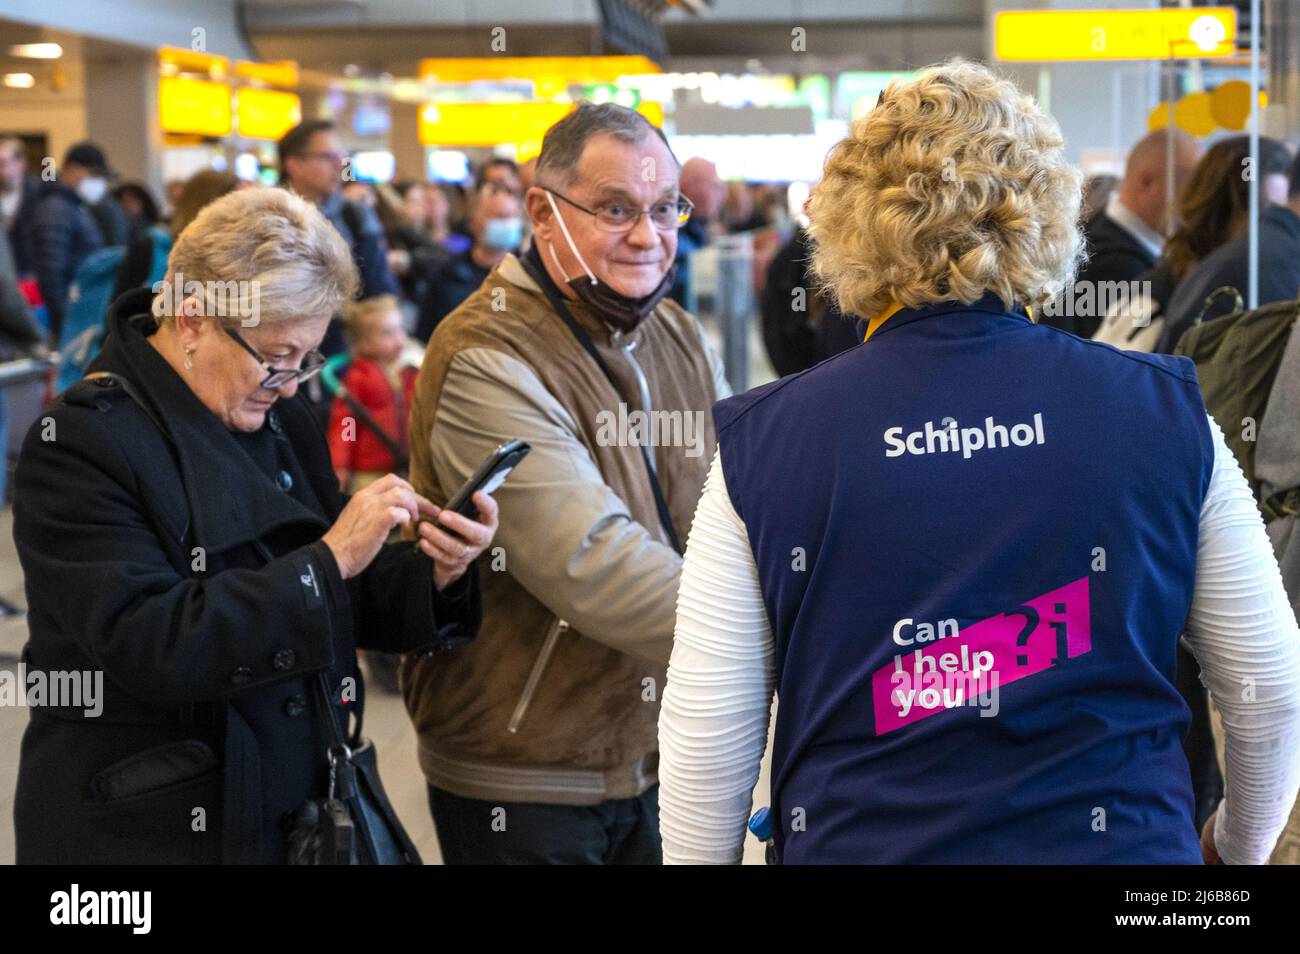 Schiphol, Netherlands. 30th Apr, 2022. 2022-04-30 06:39:15 SCHIPHOL - Schiphol Airport is very busy this weekend. The airport is facing serious staff shortages because there are hundreds of vacancies at the check-in desks, security and in the baggage basement that cannot be filled. ANP EVERT ELZINGA netherlands out - belgium out Credit: ANP/Alamy Live News Stock Photo